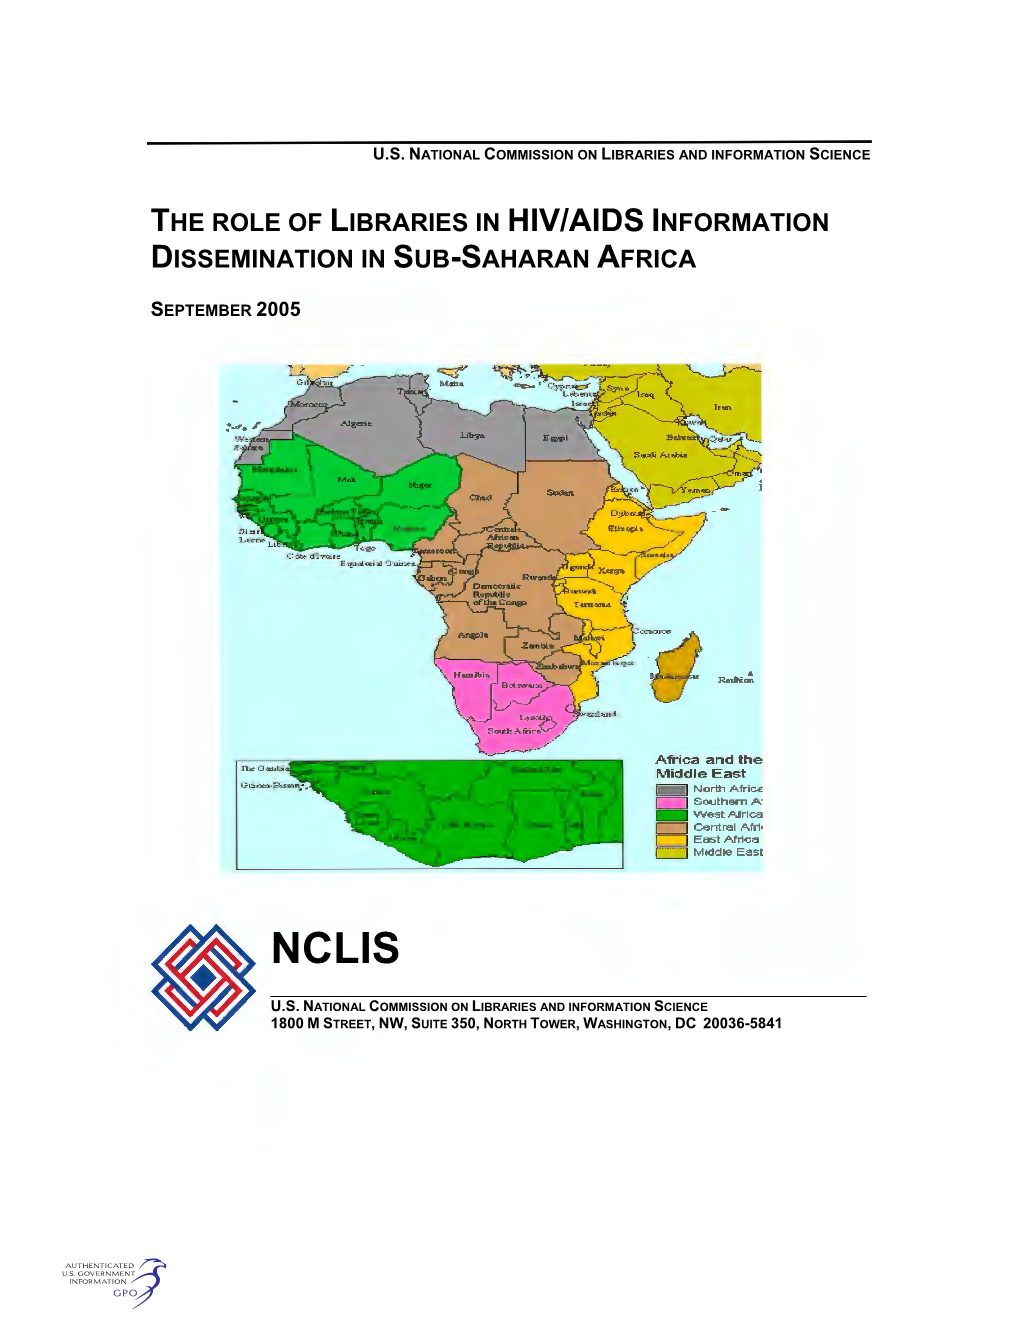 The Role of Libraries in Hiv/Aids Information Dissemination in Sub-Saharan Africa